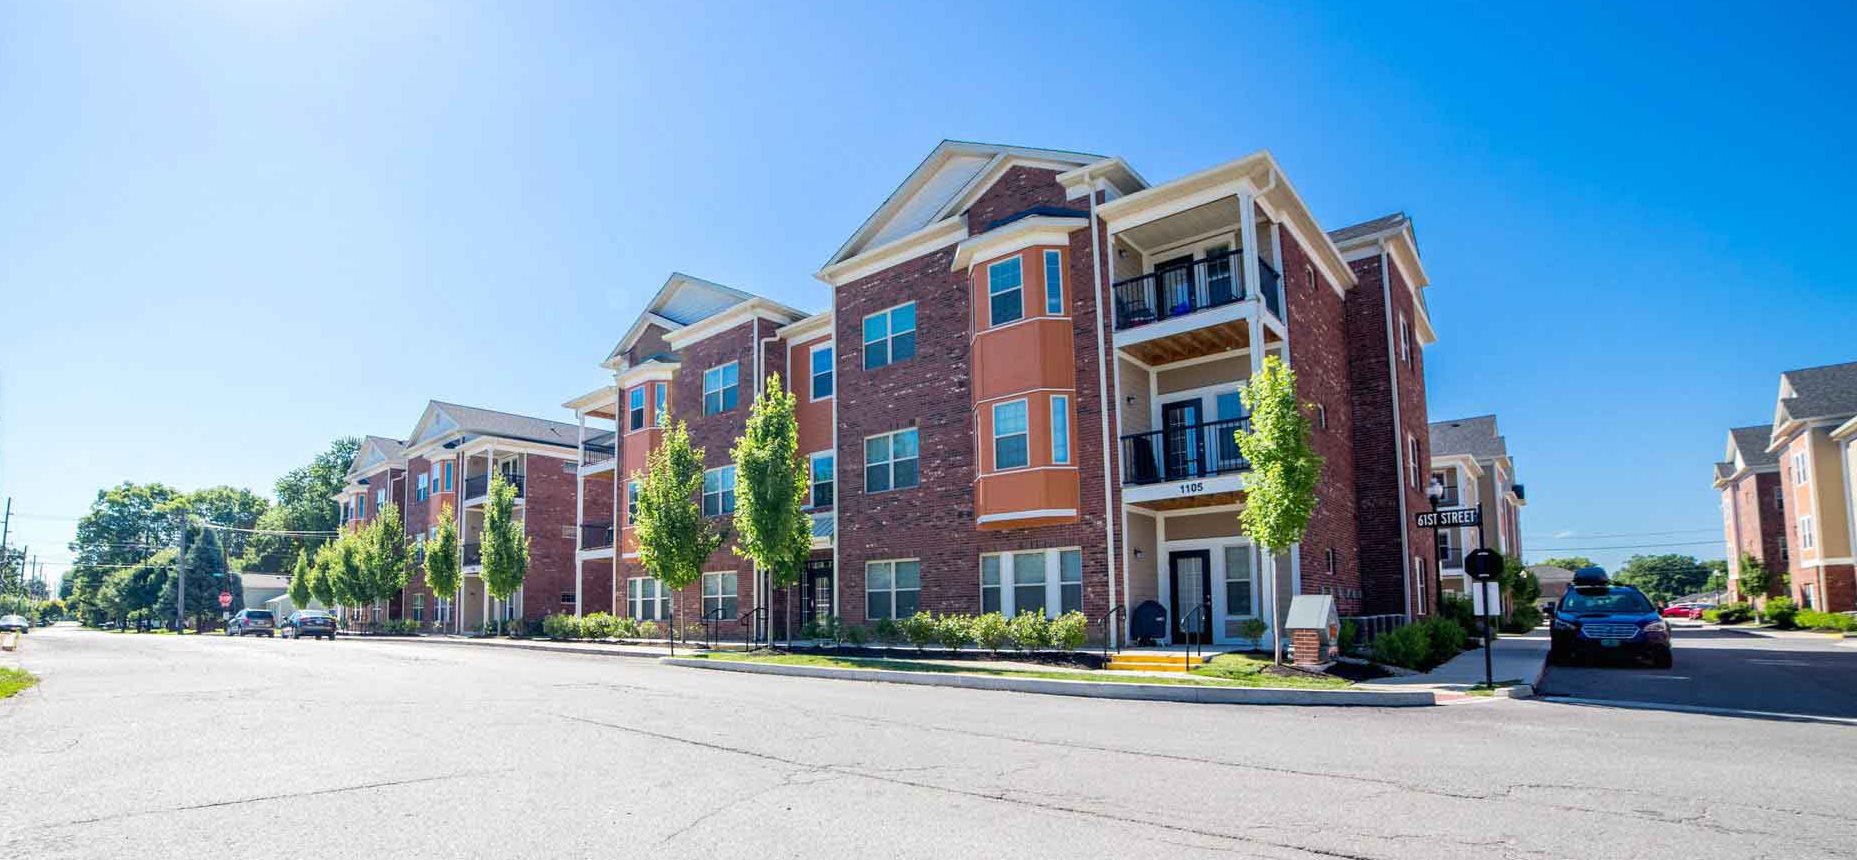 Monon Living Apartments In Broad Ripple Village Indianapolis IN